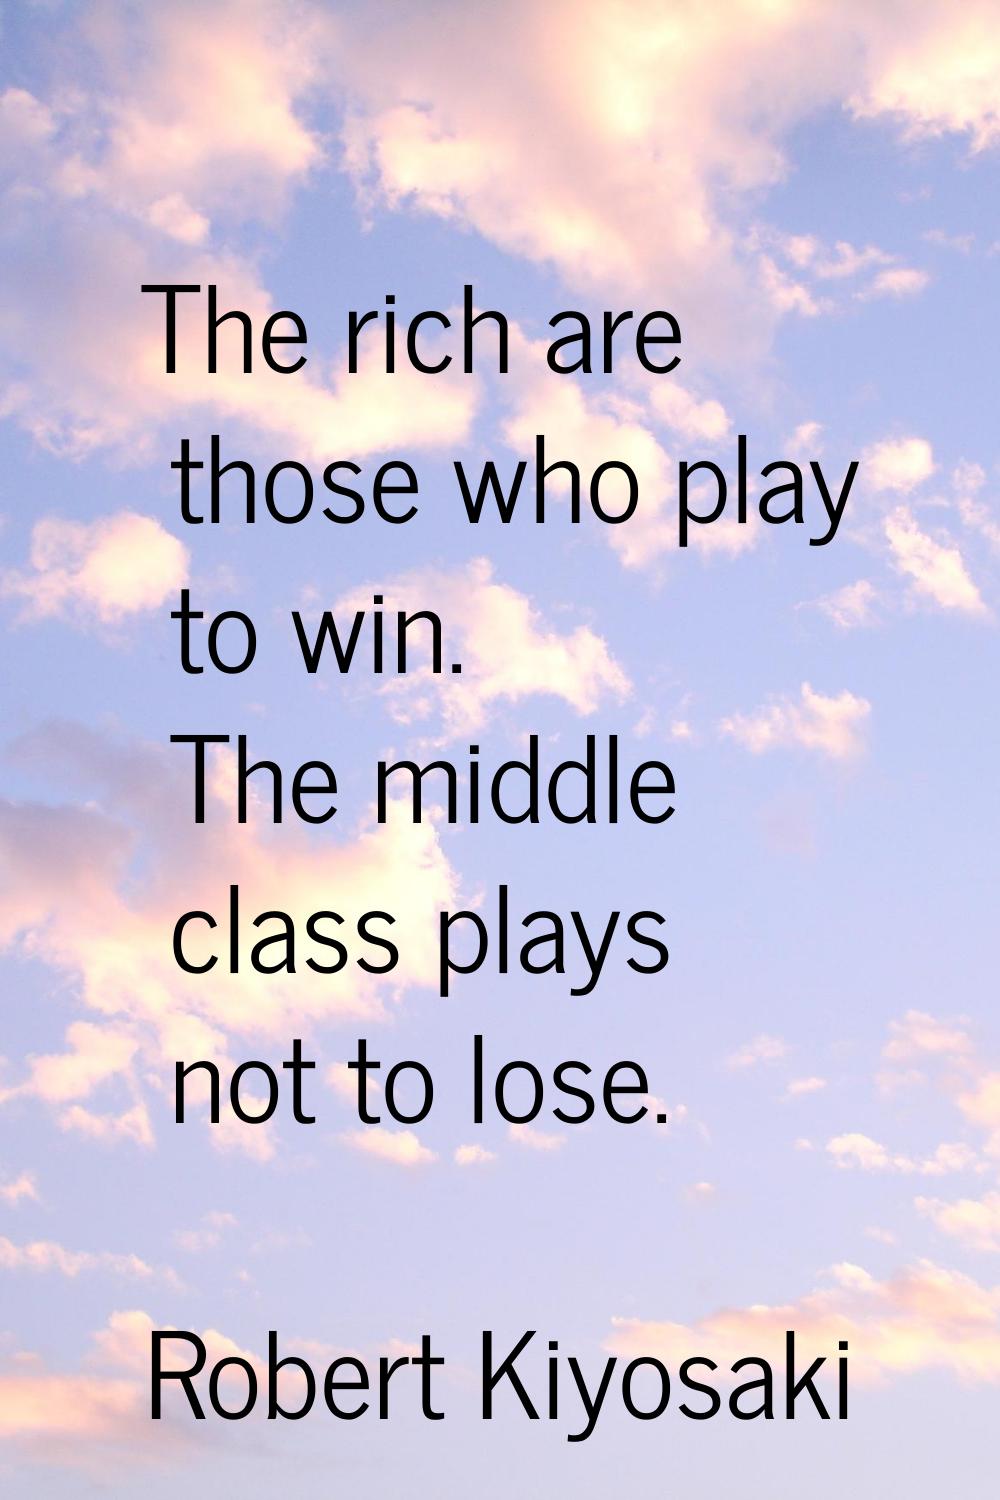 The rich are those who play to win. The middle class plays not to lose.